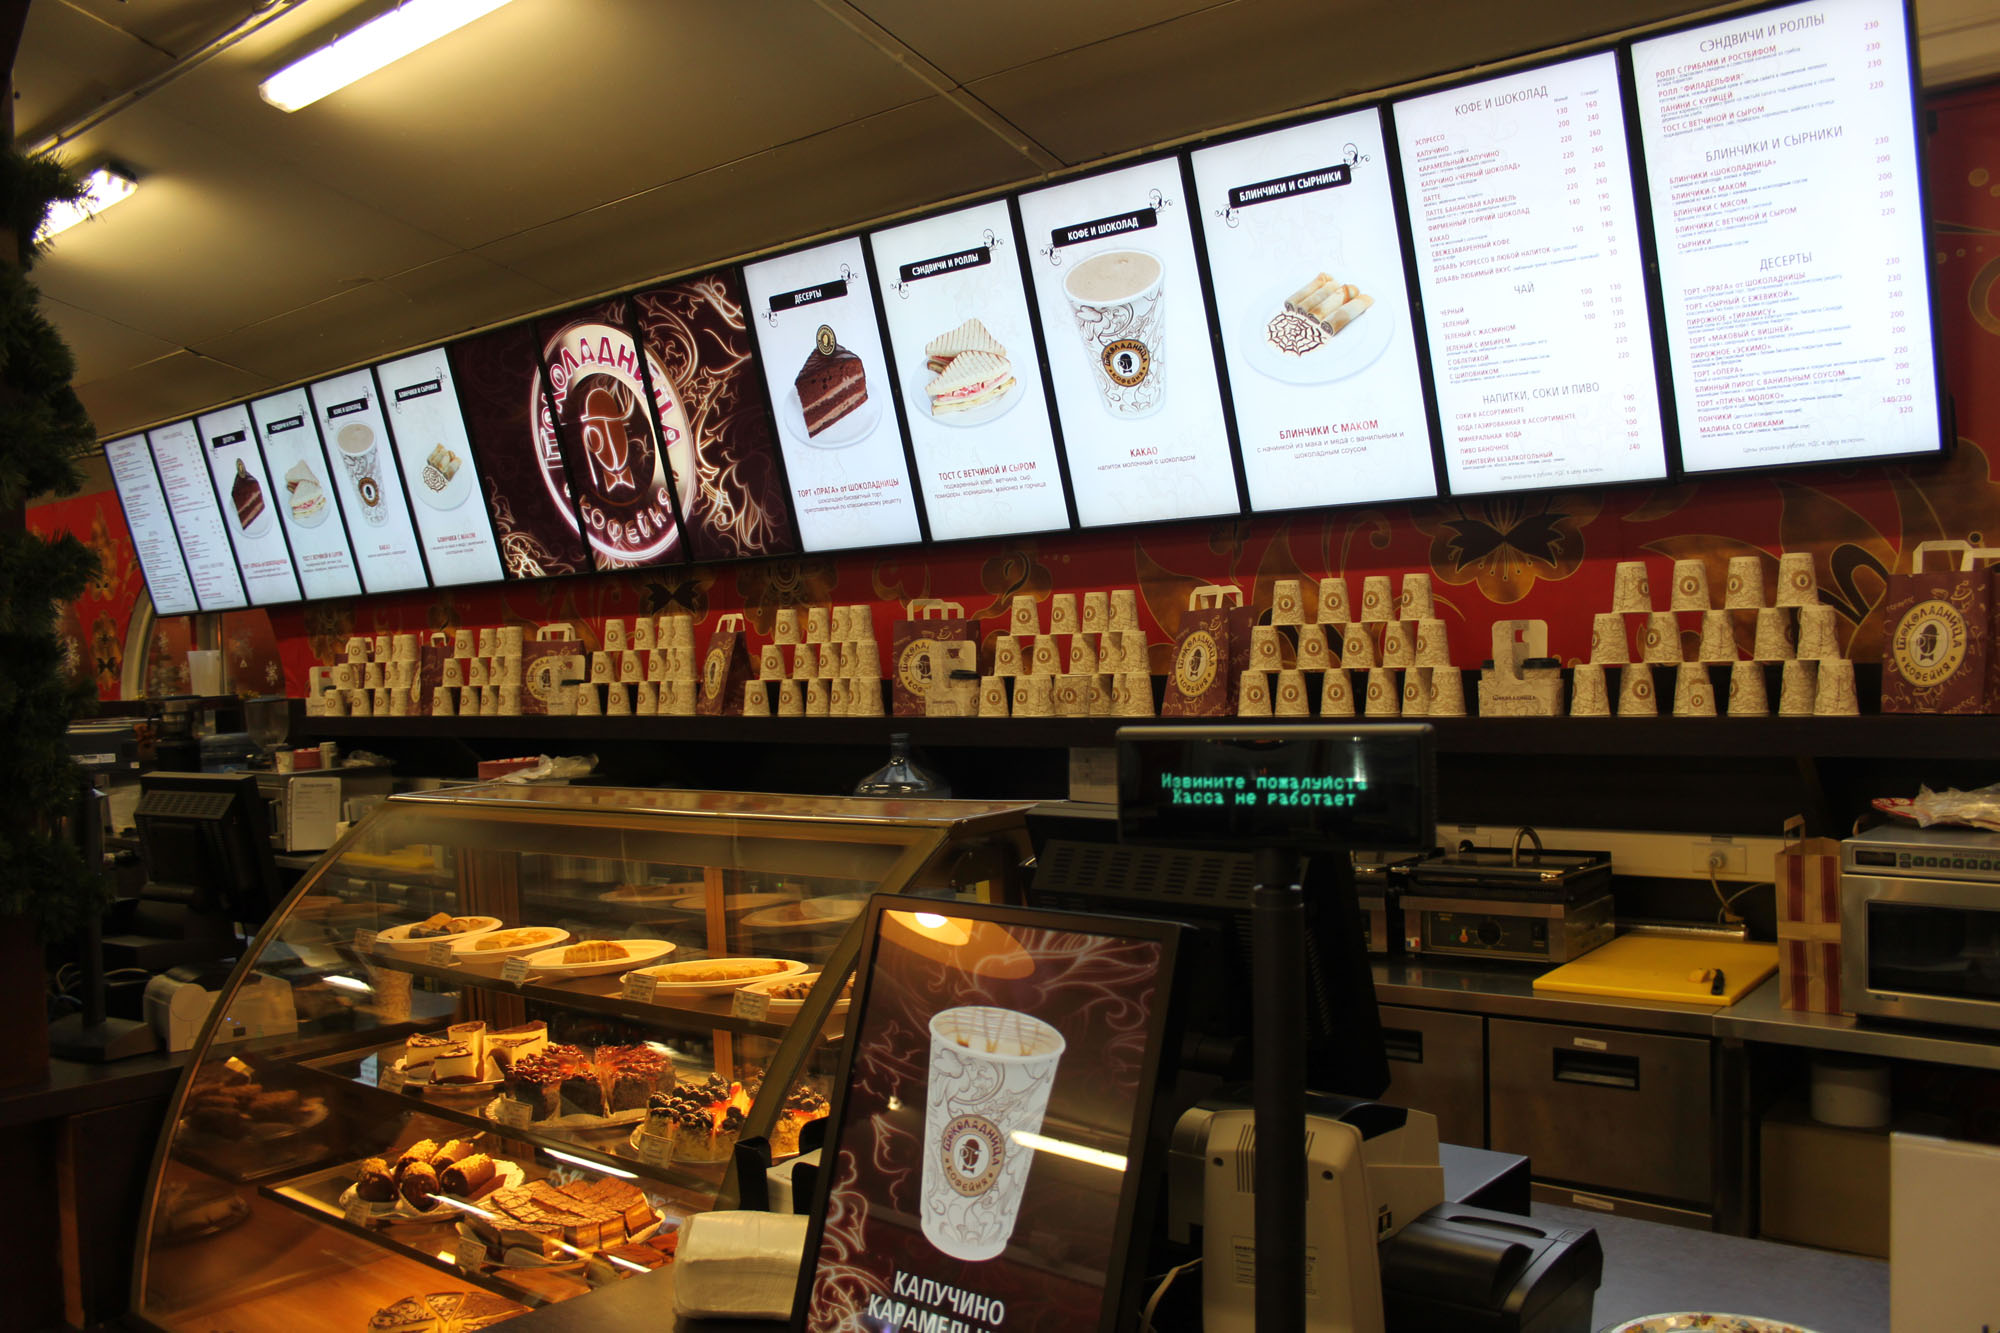 Why Every Restaurant Needs Digital Signs